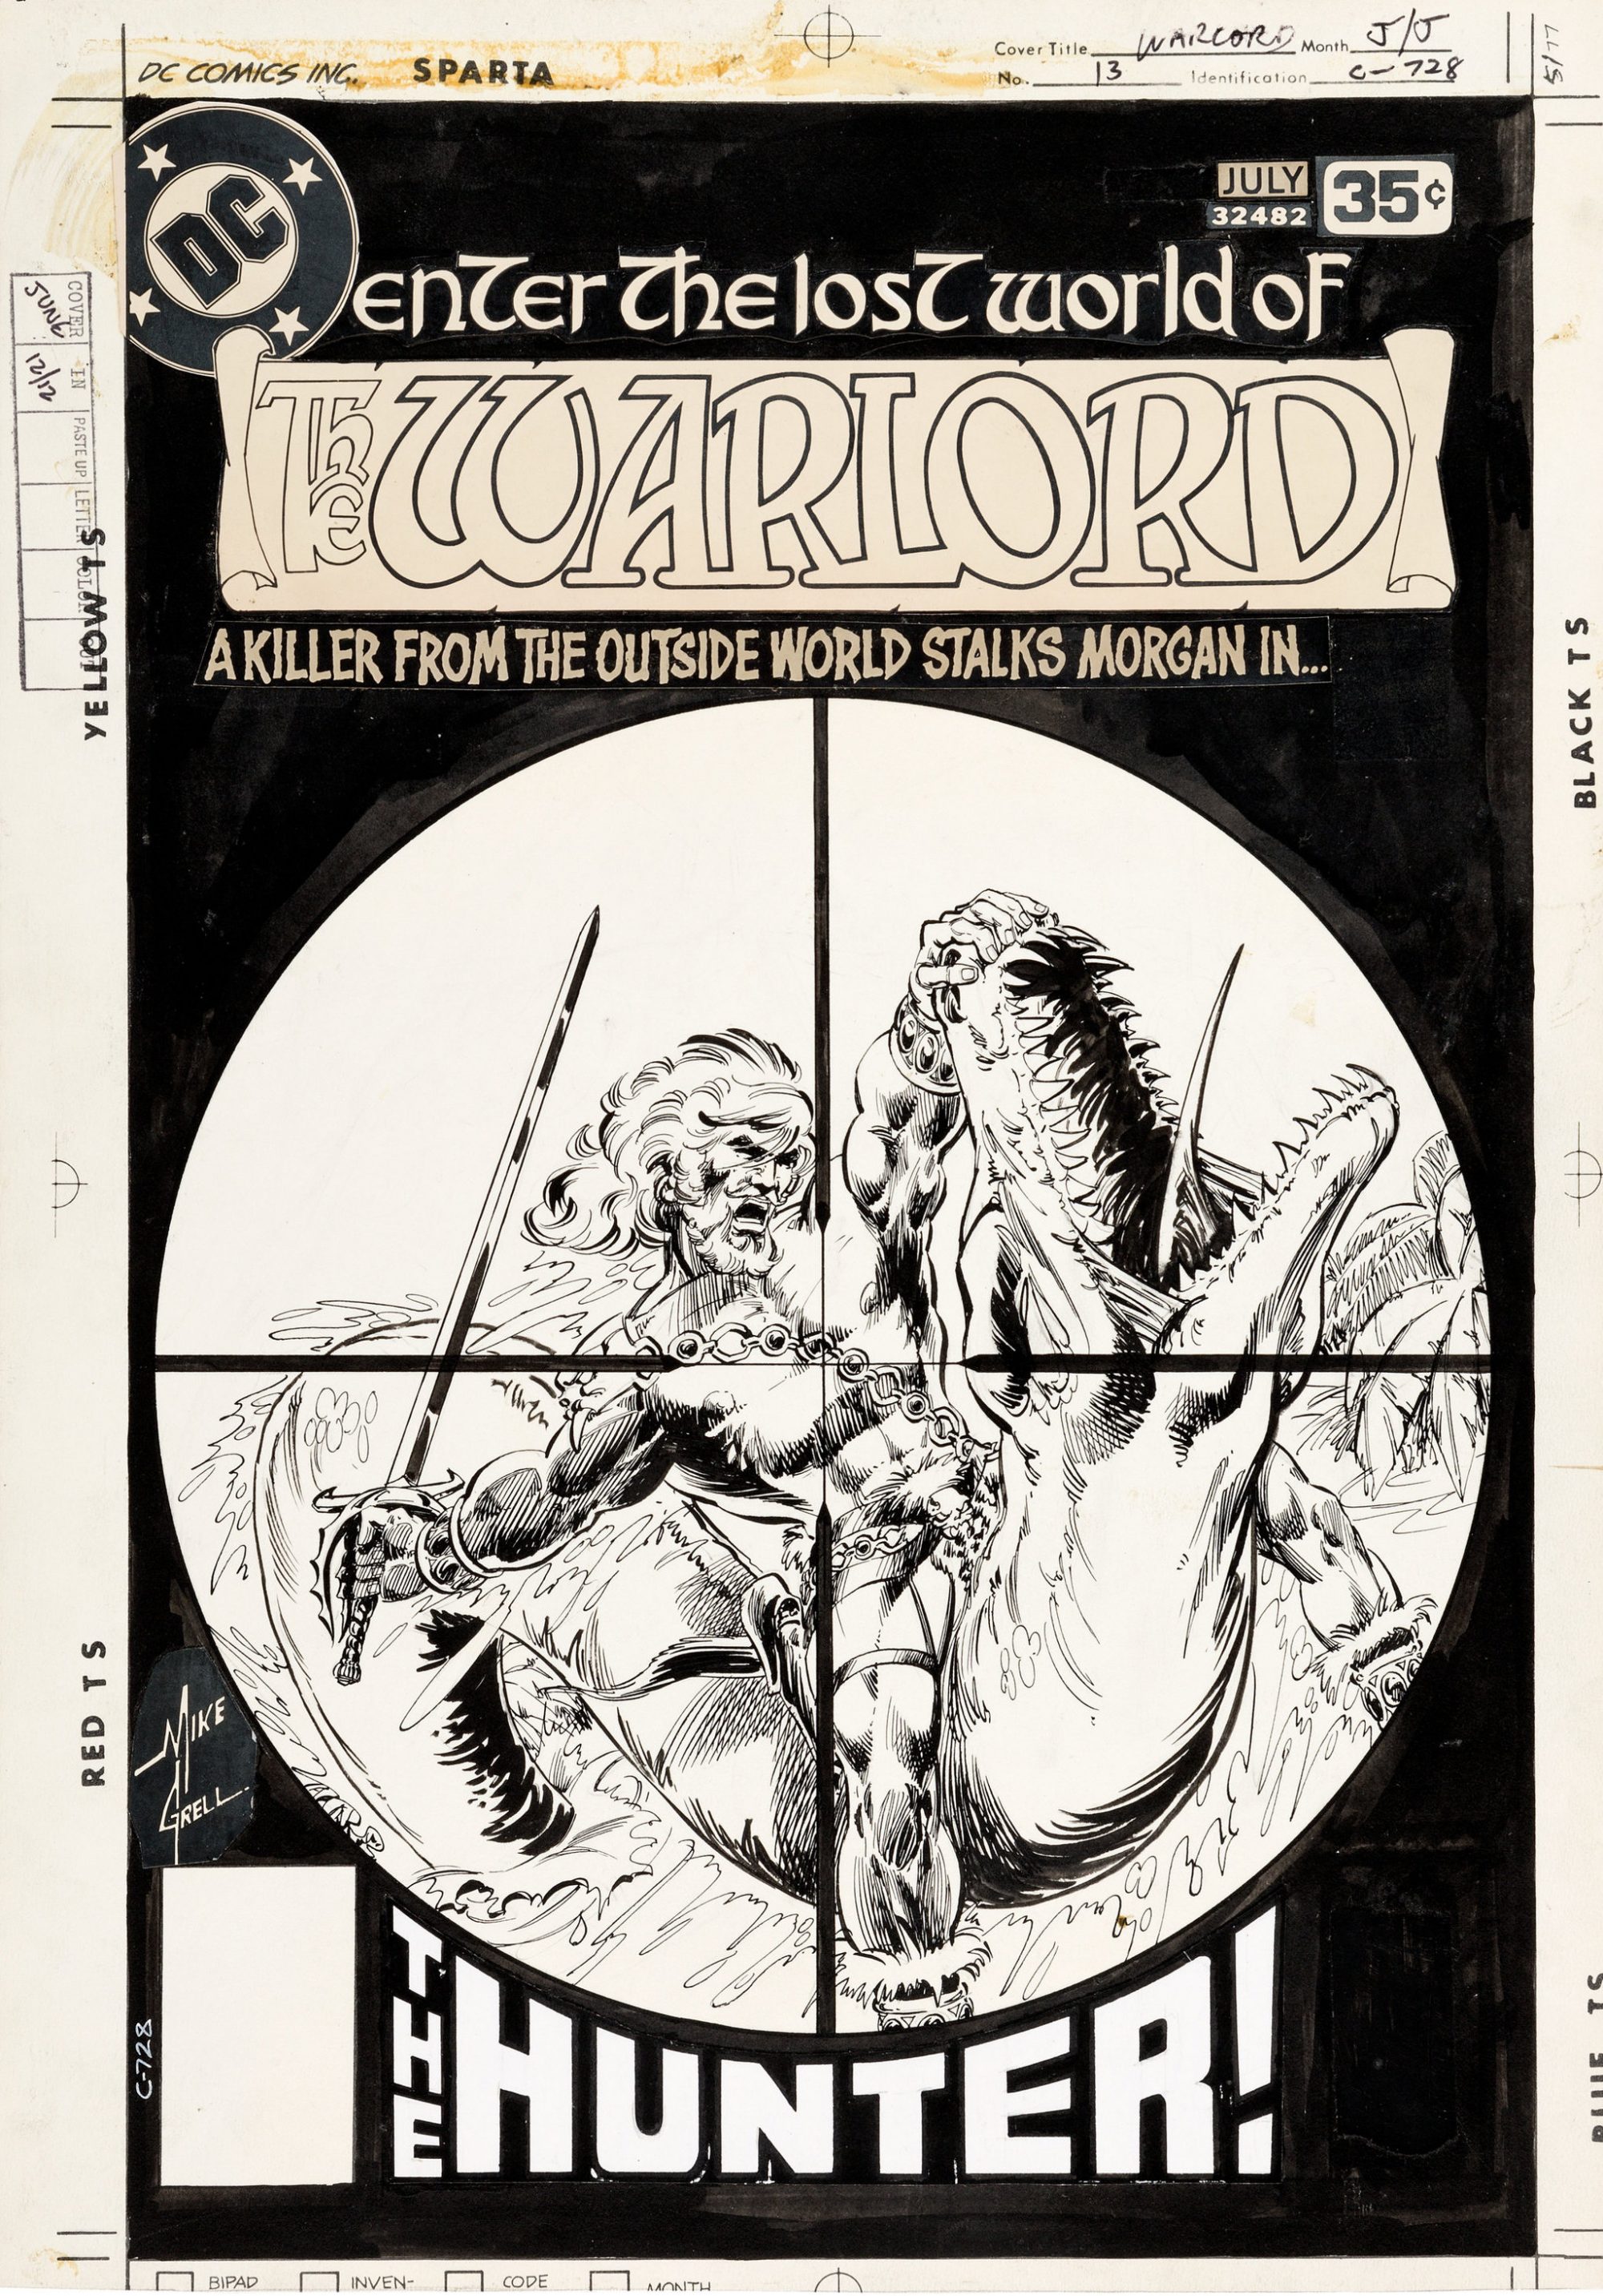 Mike Grell Warlord #13 Cover